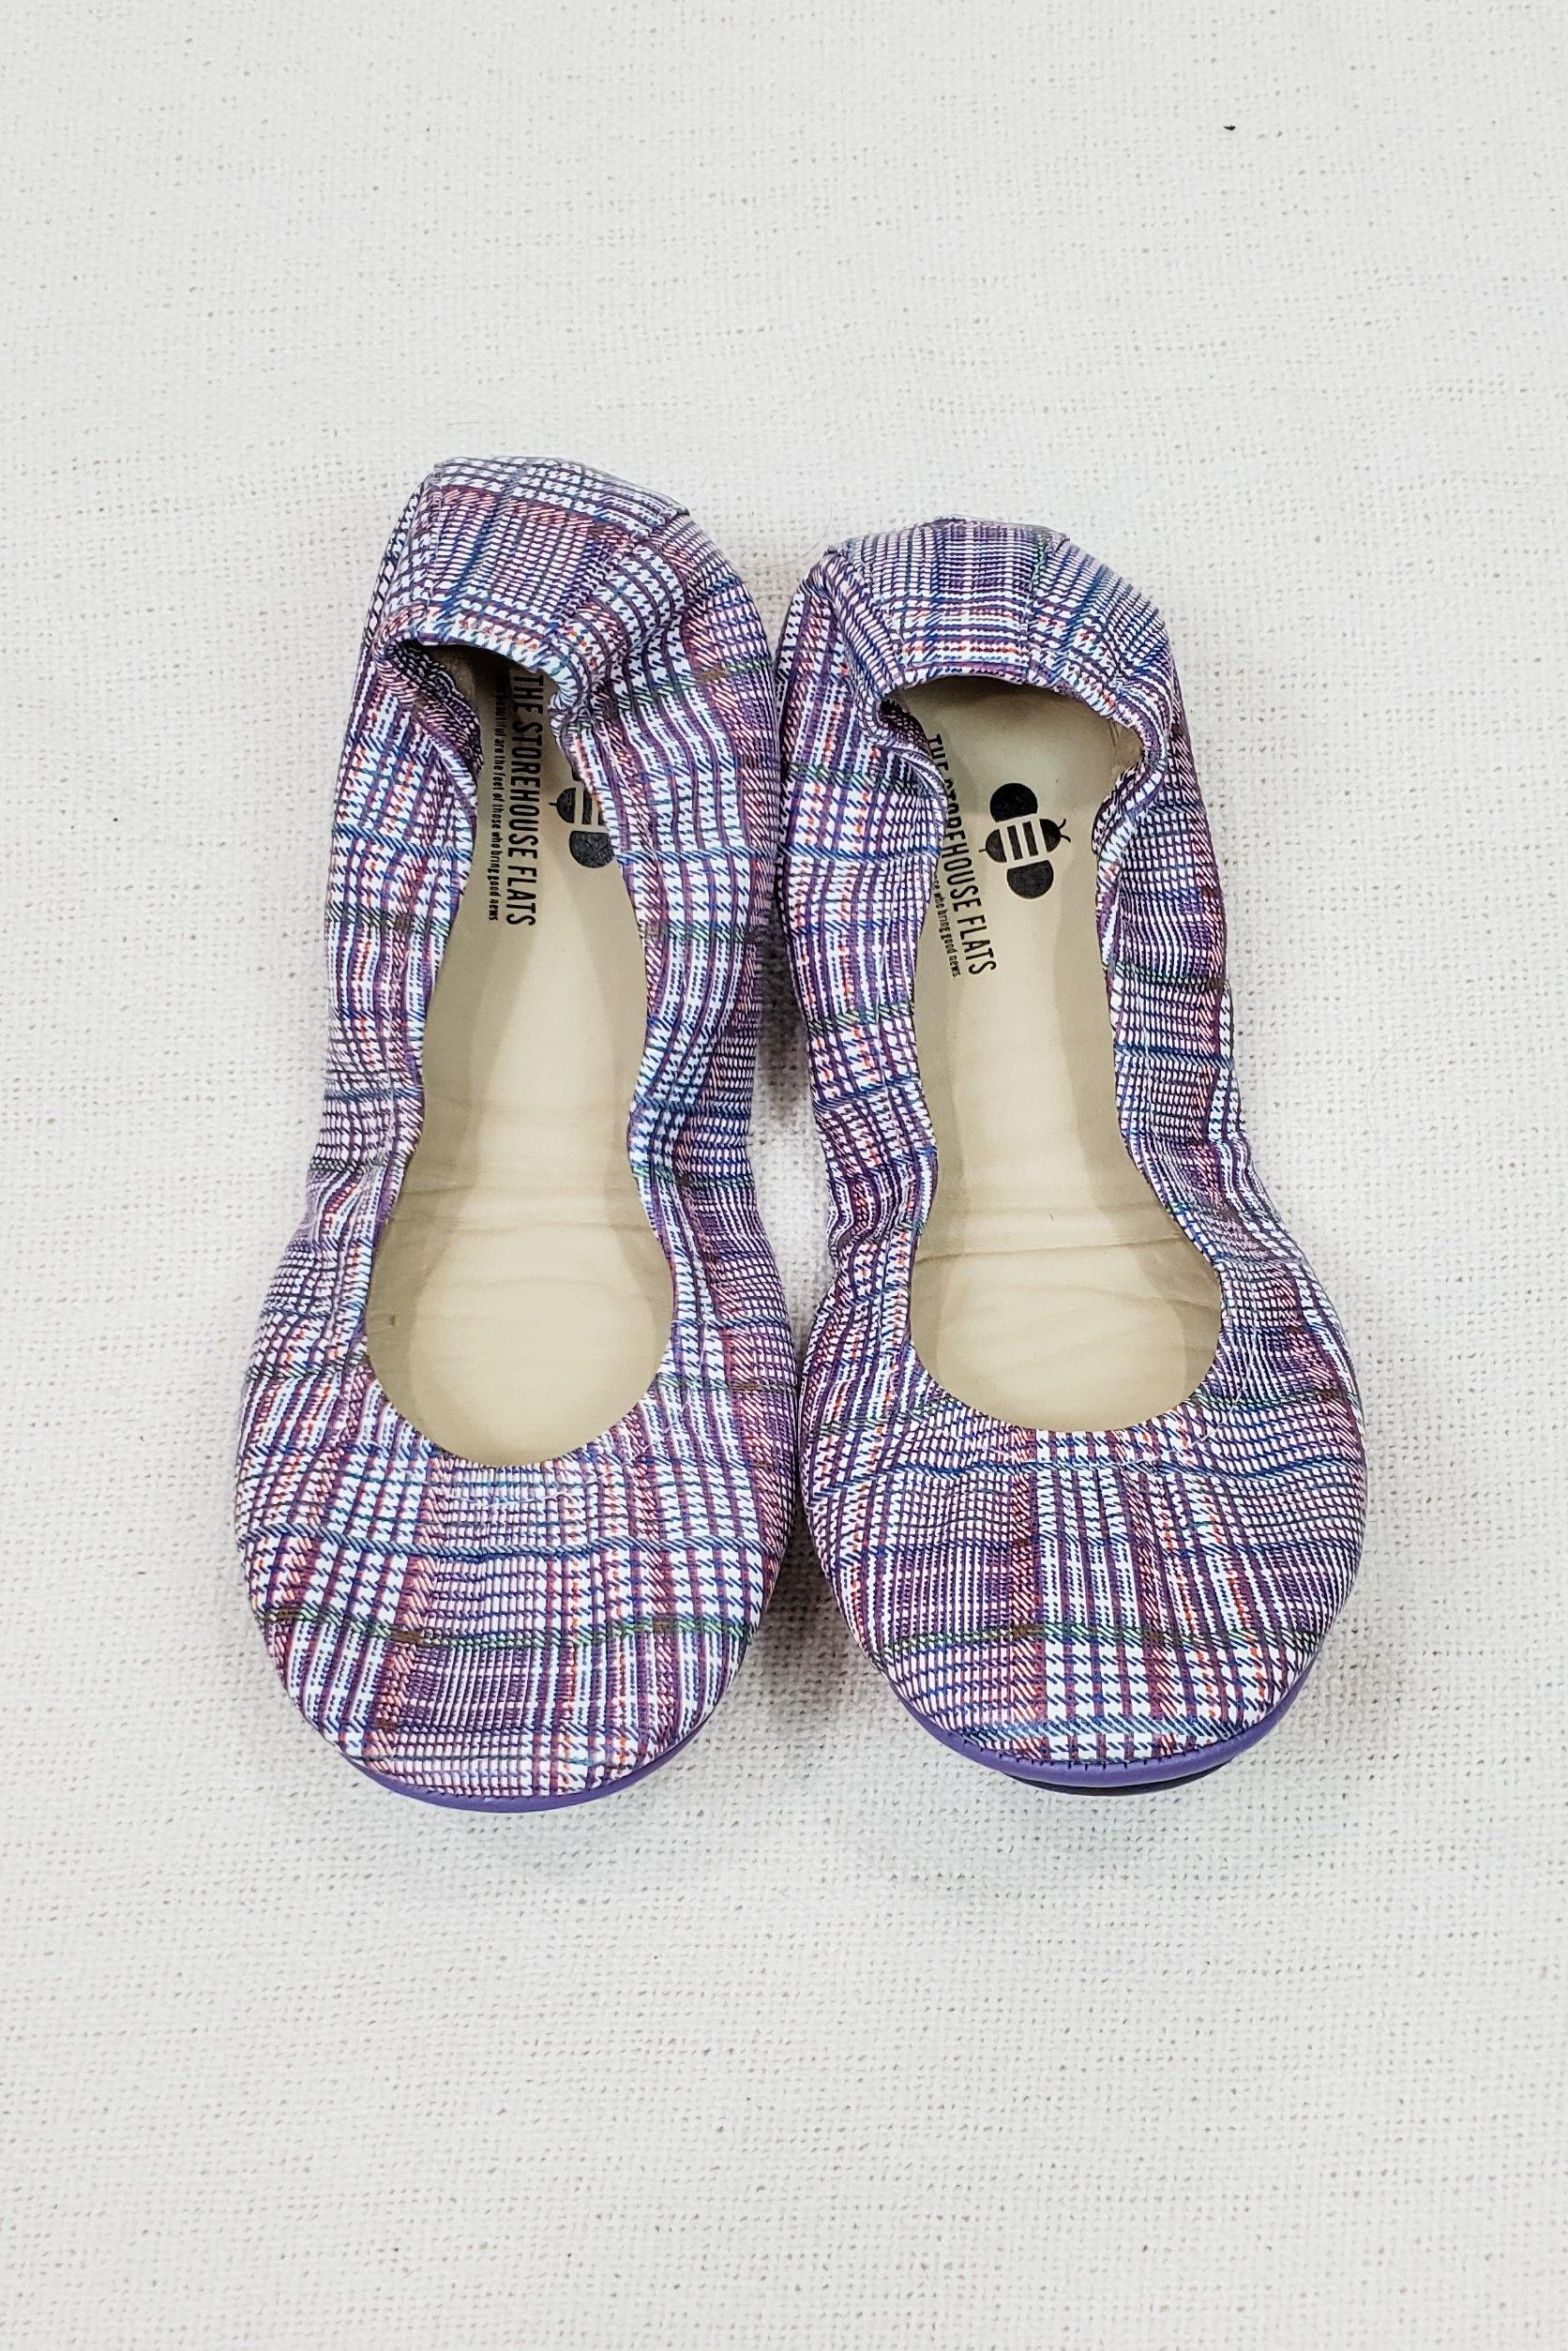 Purposely Plaid Limited Edition Leather Storehouse Flats - Size 9 - Lavender Latte Boutique